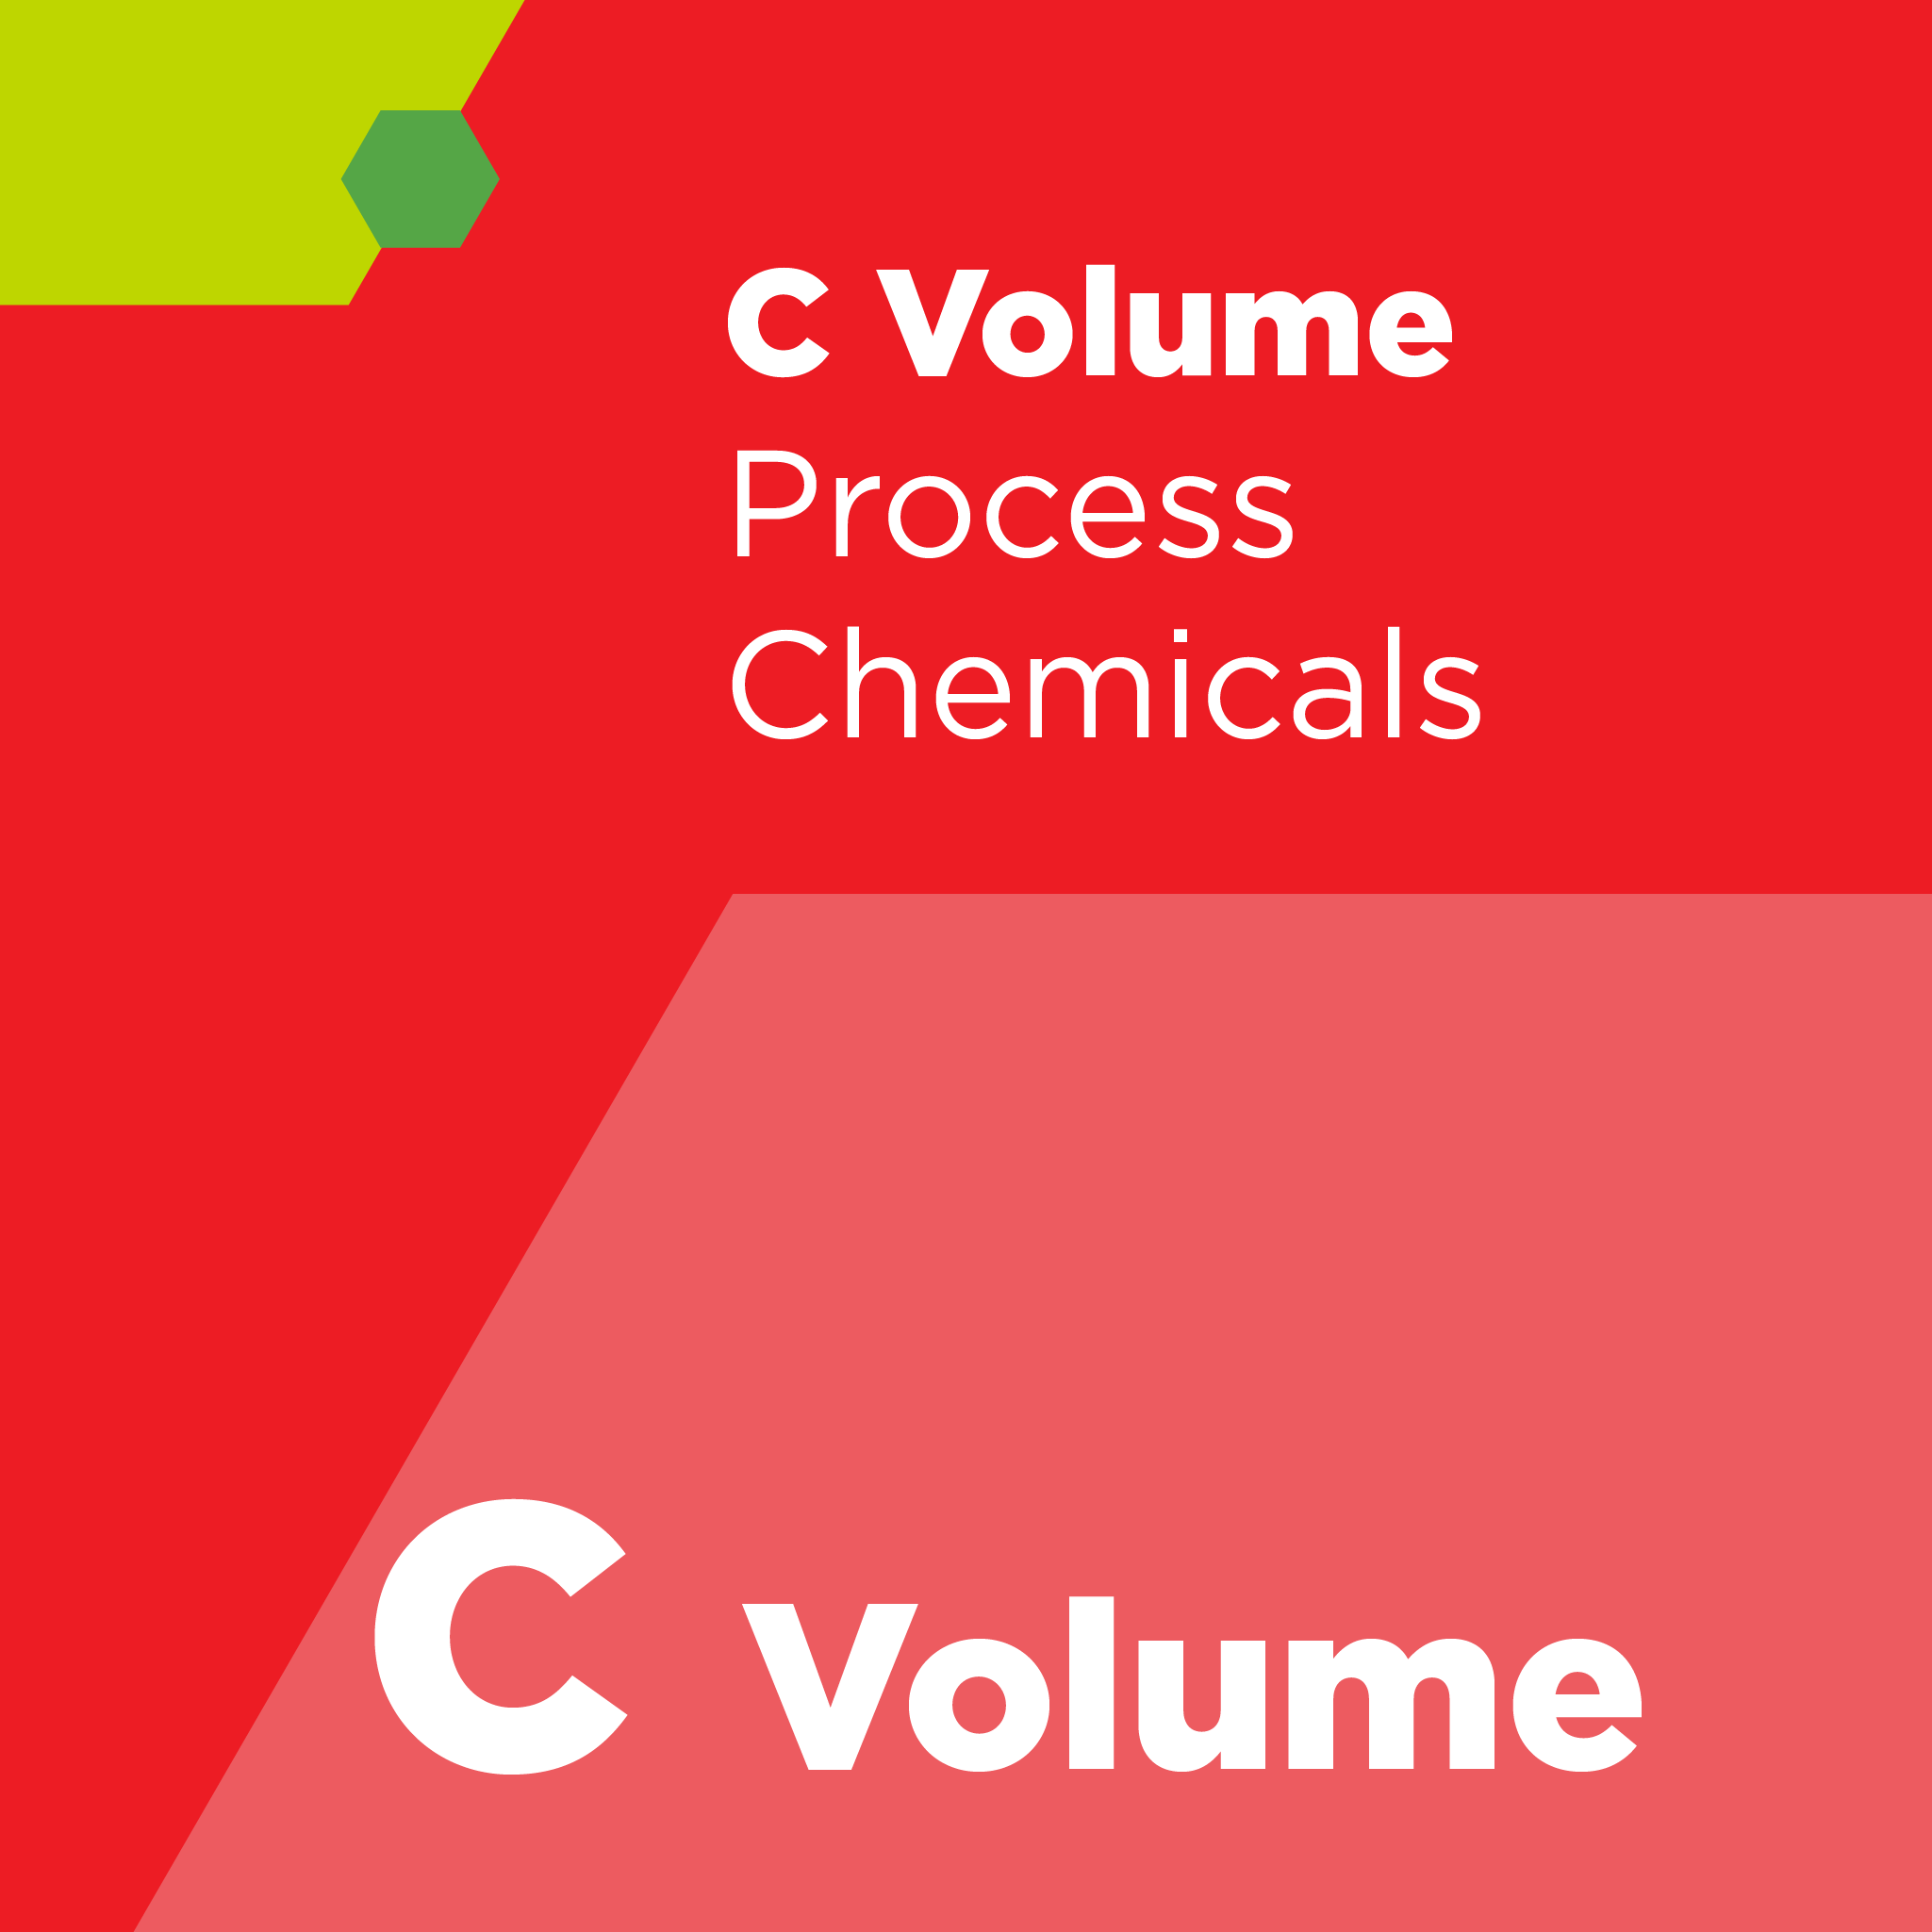 C02800 - SEMI C28 - Specification and Guide for Hydrofluoric Acid